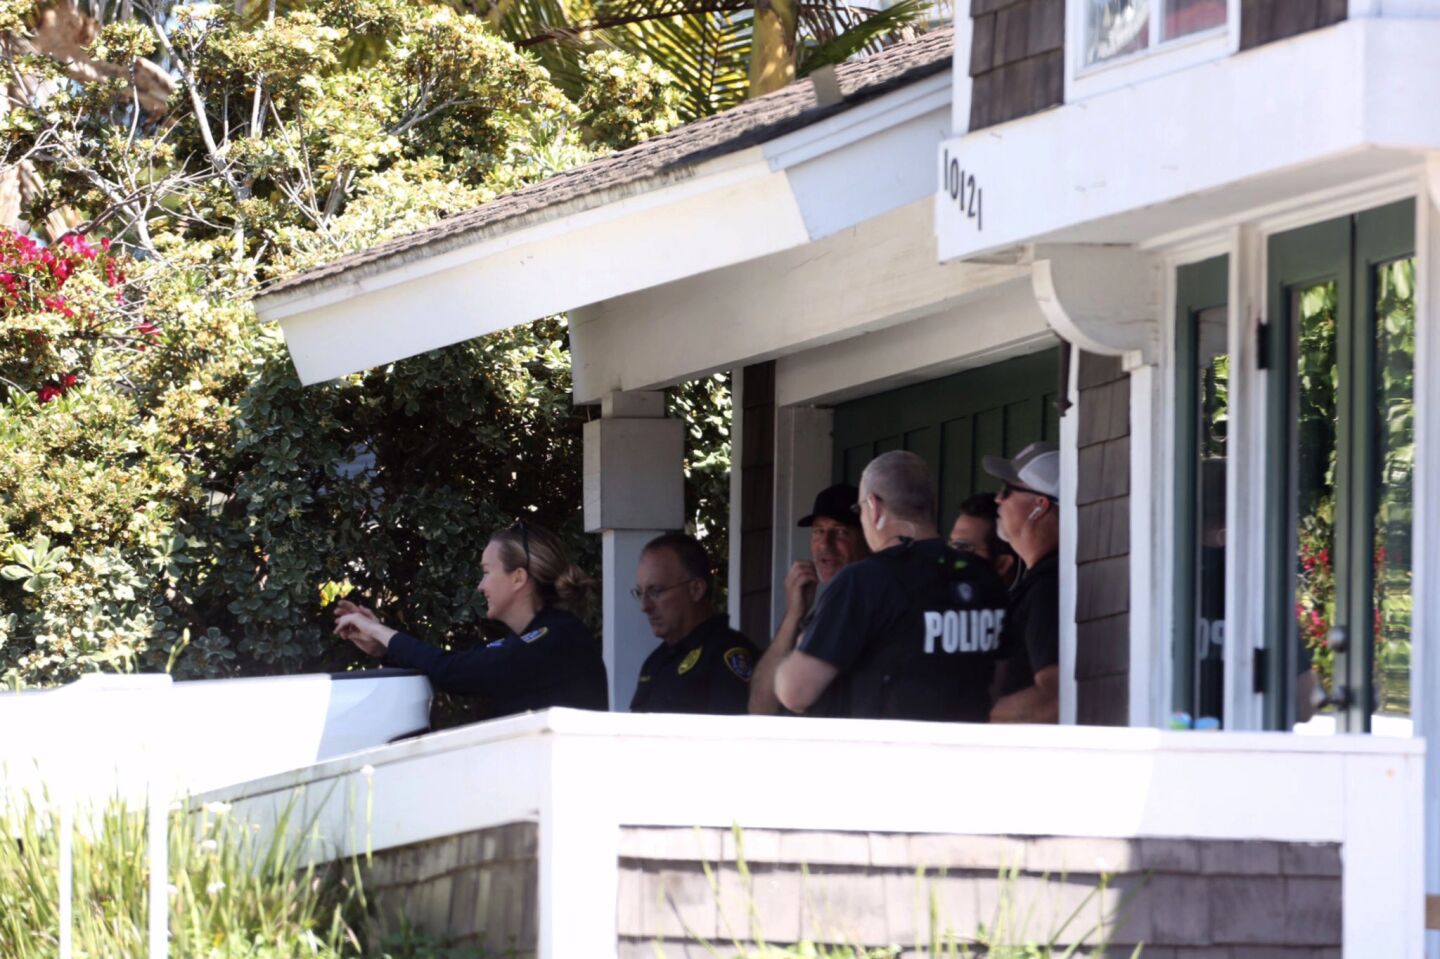 Police surround a house related to the investigation of the synagogue shooting in Poway.